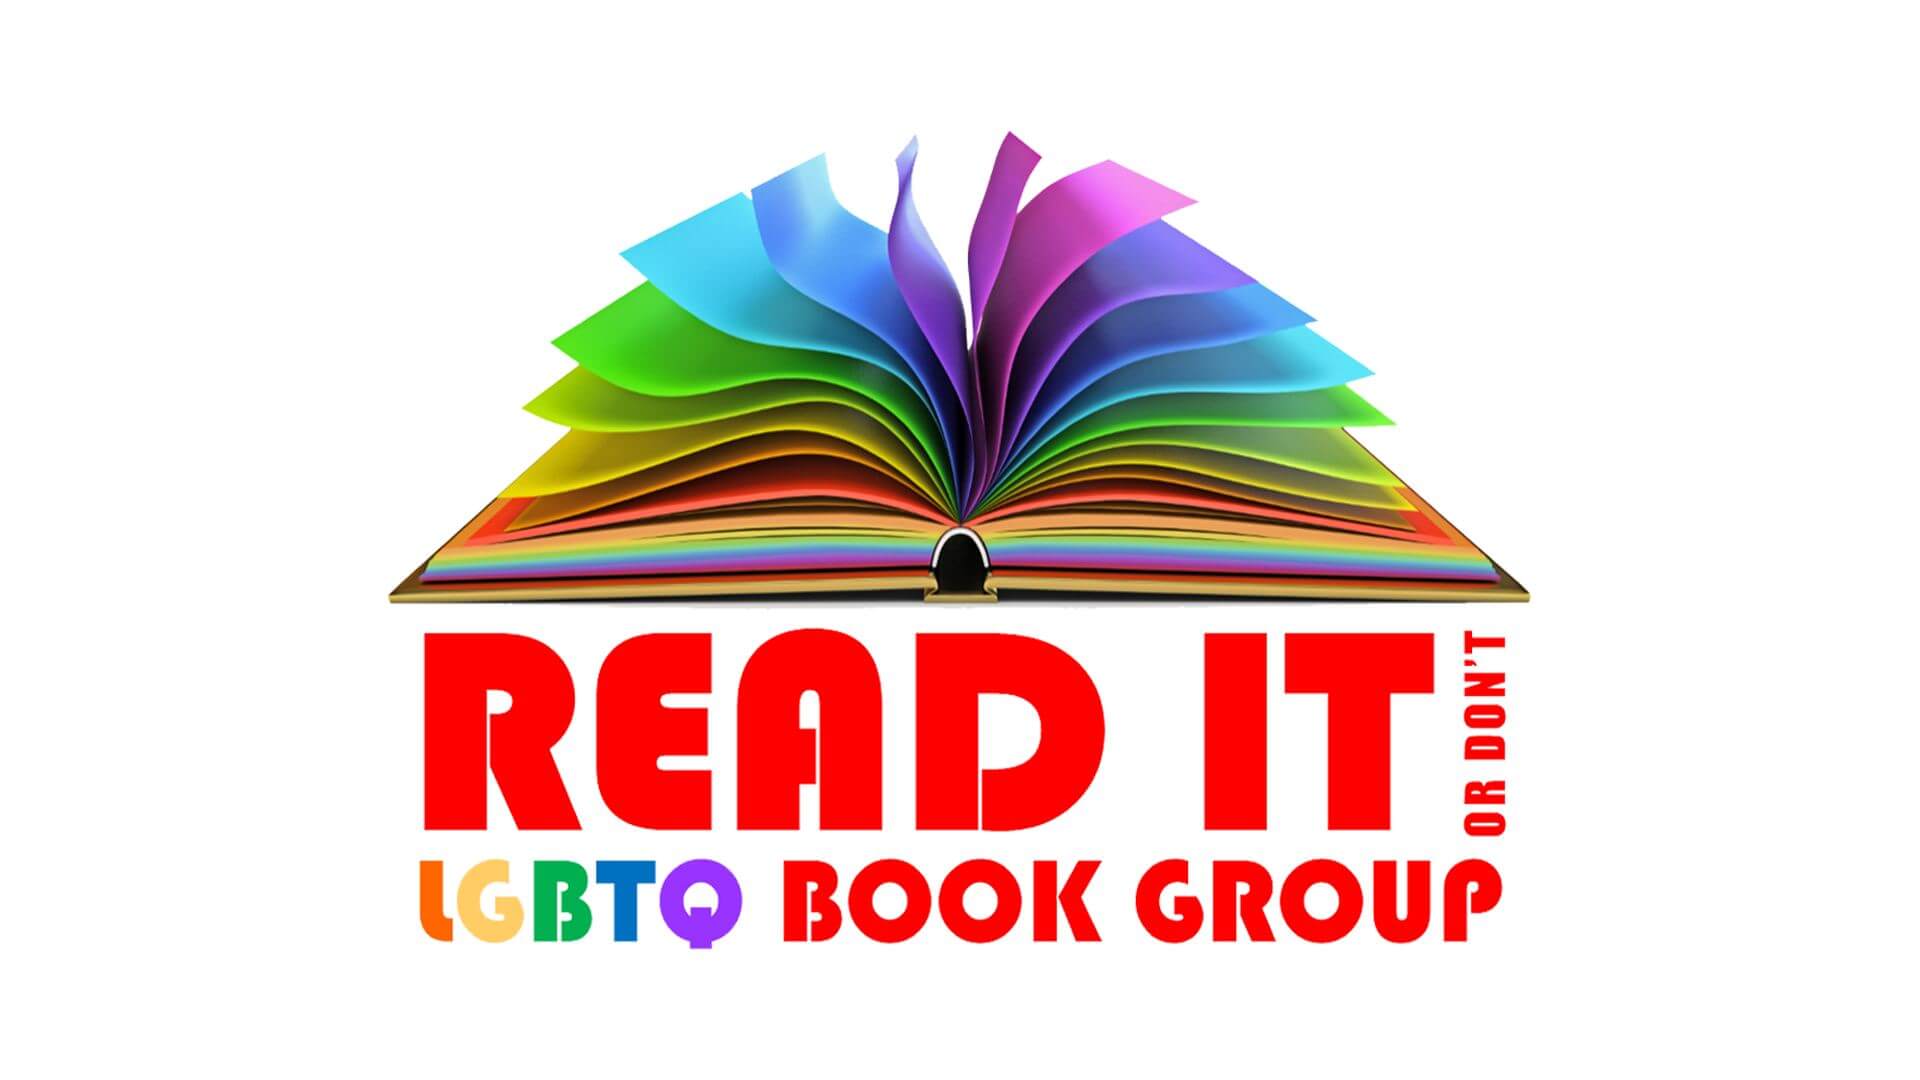 A drawing of a book with rainbow pages and red text that reads "READ IT OR DON'T LGBTQ BOOK GROUP"